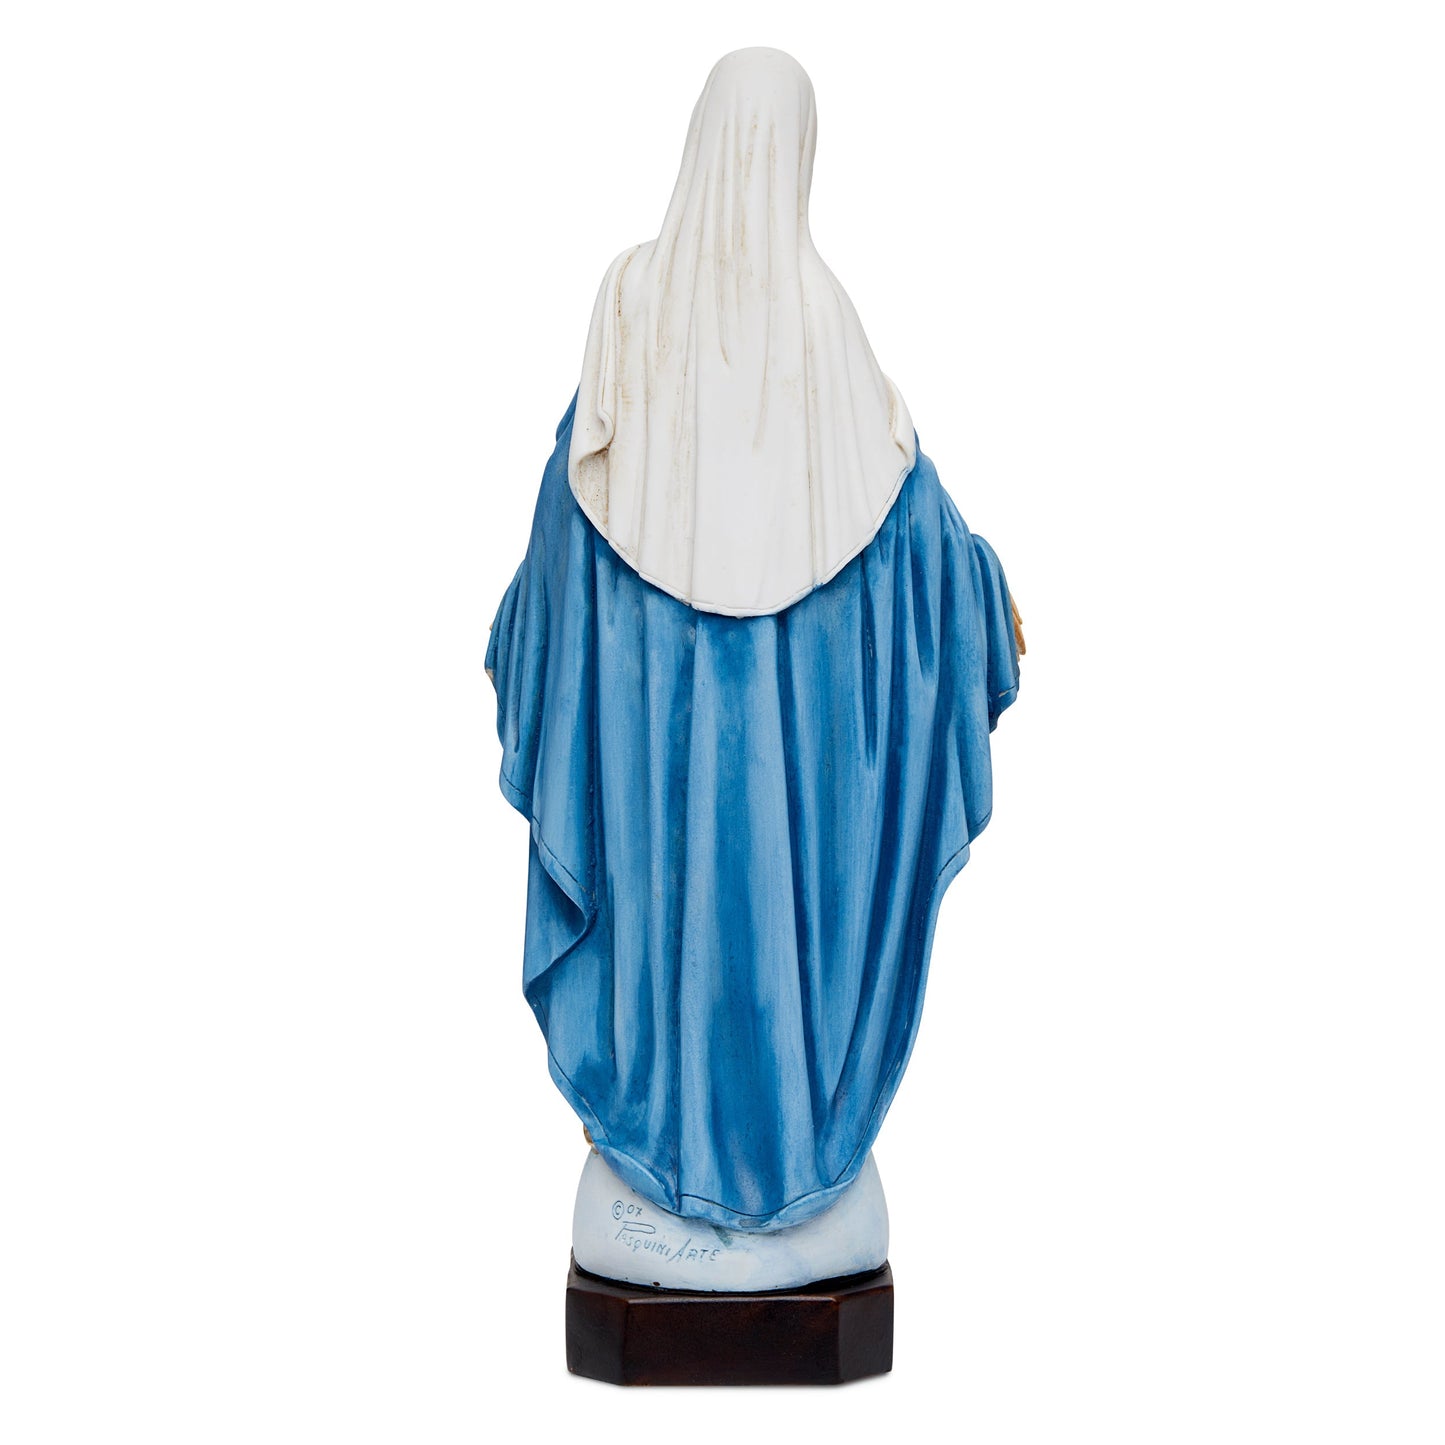 Mondo Cattolico 30 cm (11.81 in) Resin Statue of Our Lady of the Miraculous Medal